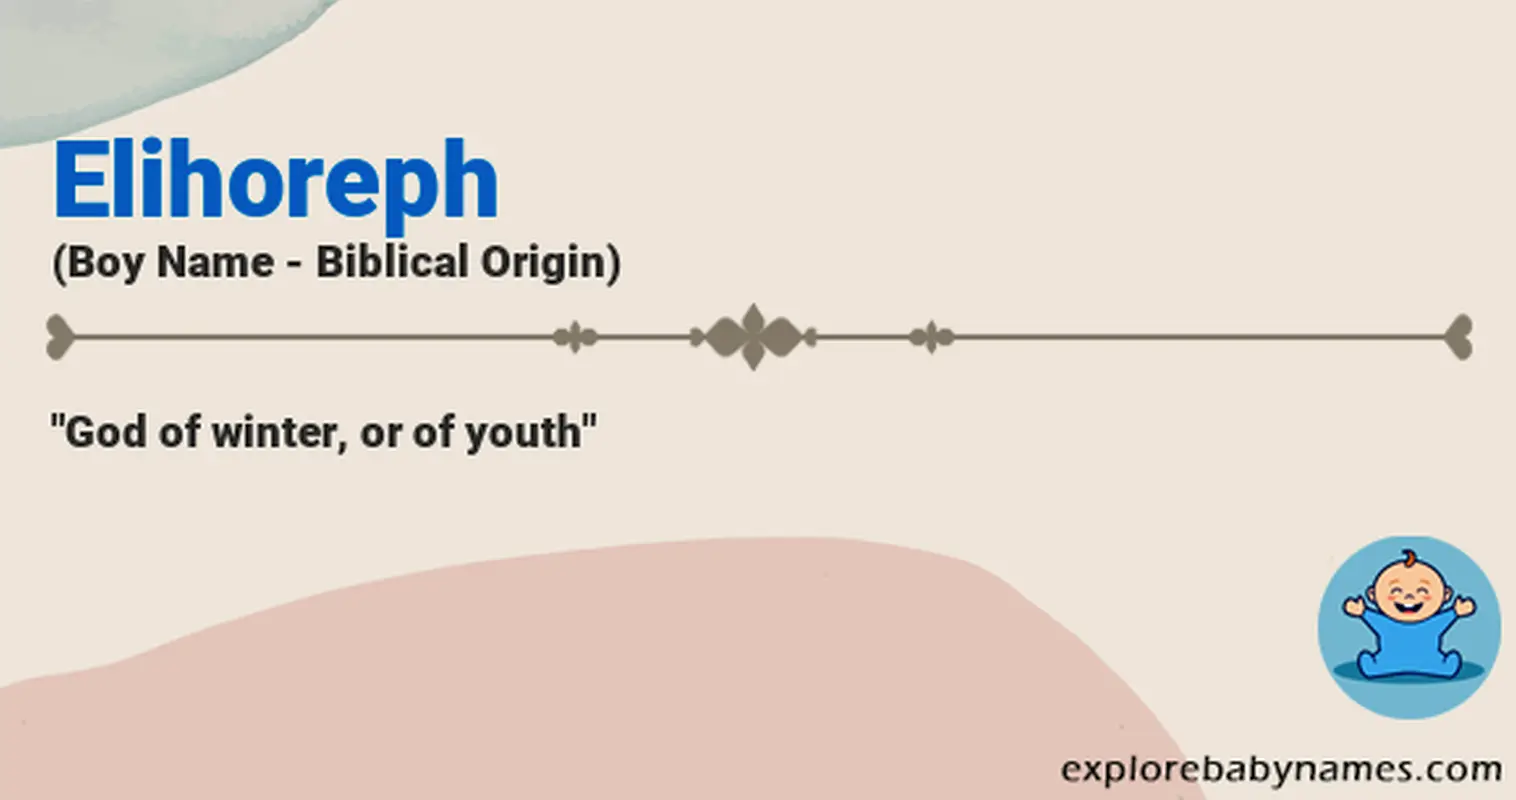 Meaning of Elihoreph